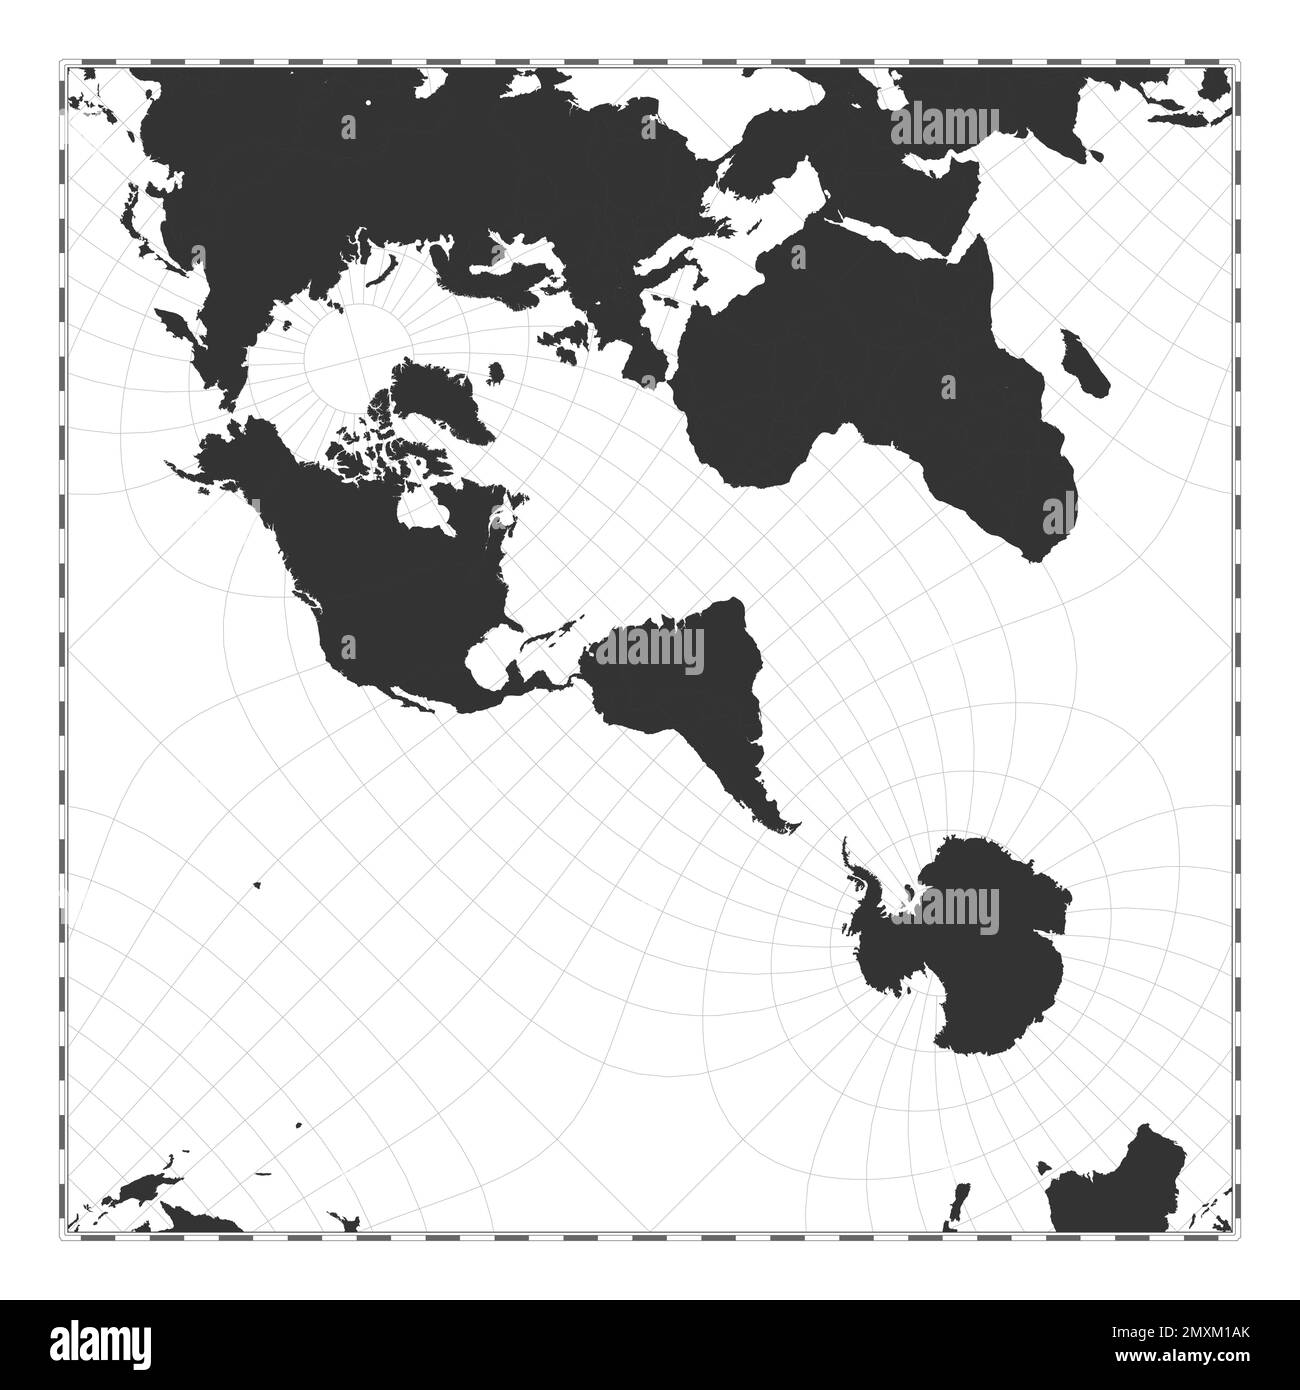 Vector world map. Peirce quincuncial projection. Plain world geographical map with latitude and longitude lines. Centered to 60deg E longitude. Vector Stock Vector